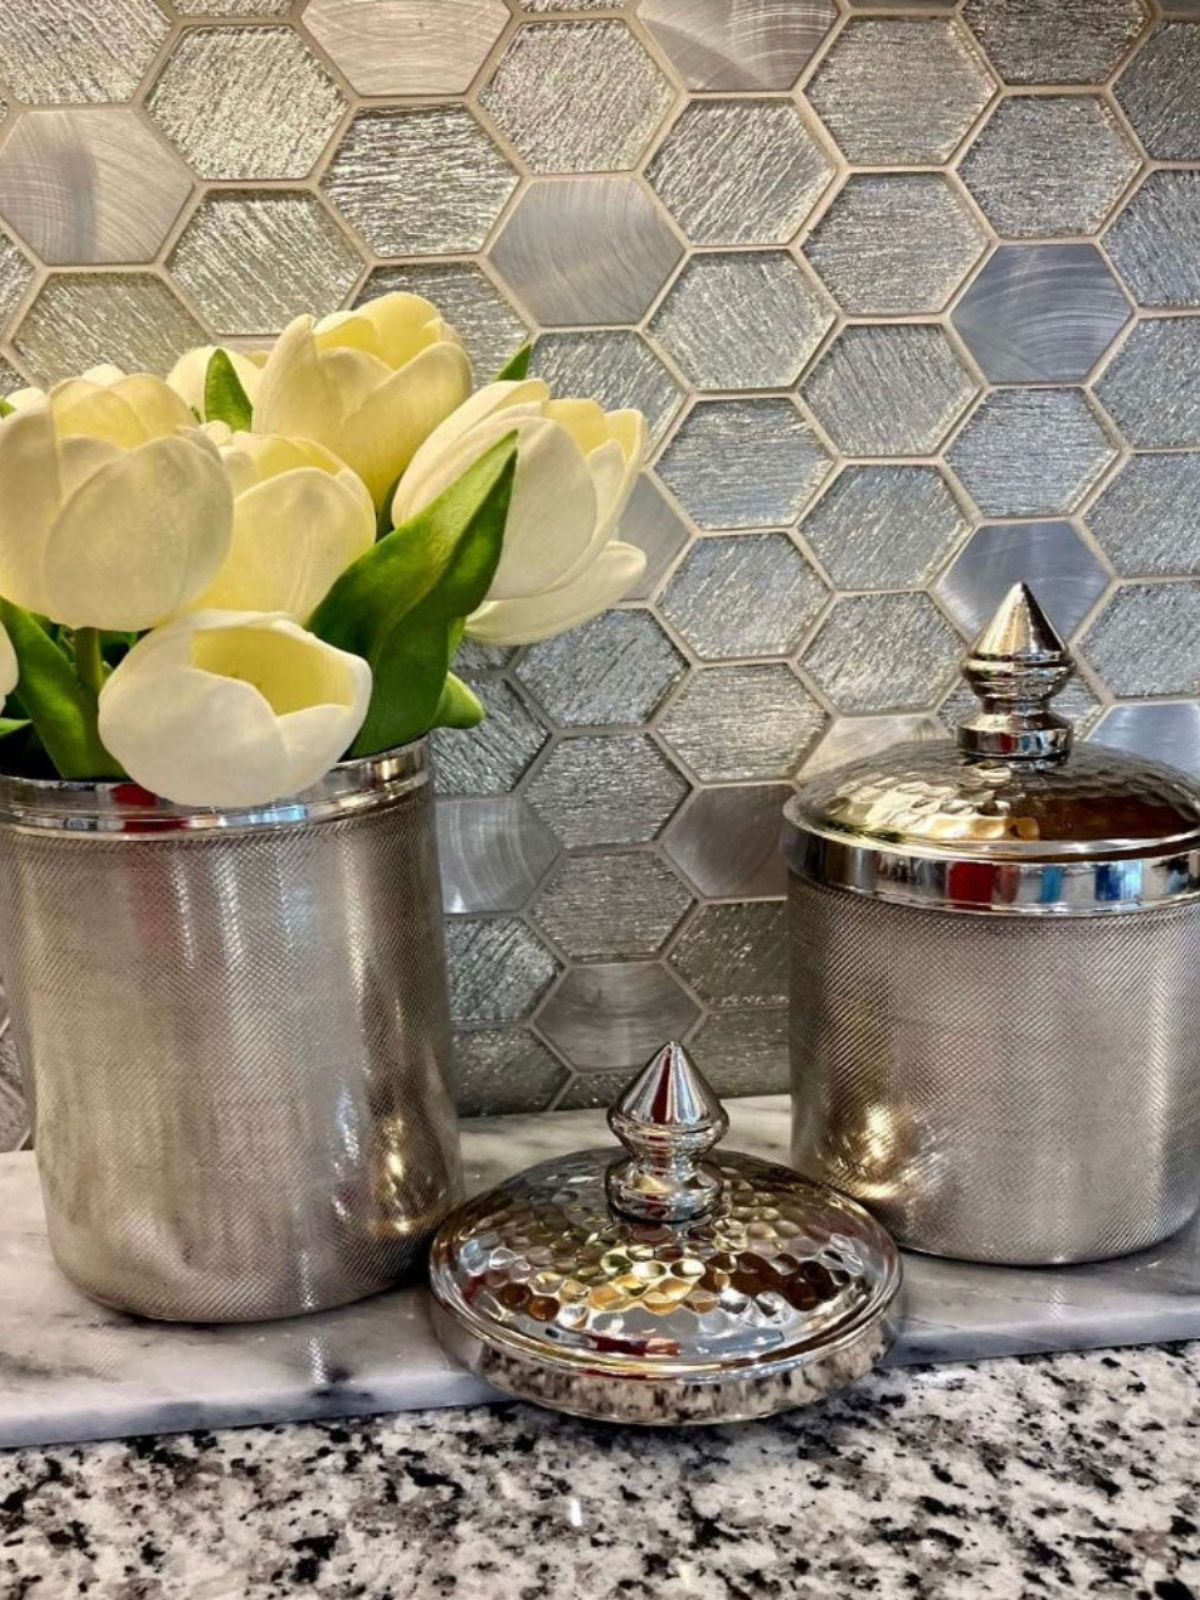 Set of 2 Silver Metal Decorative Canister with hammered mesh design - KYA Home Decor.